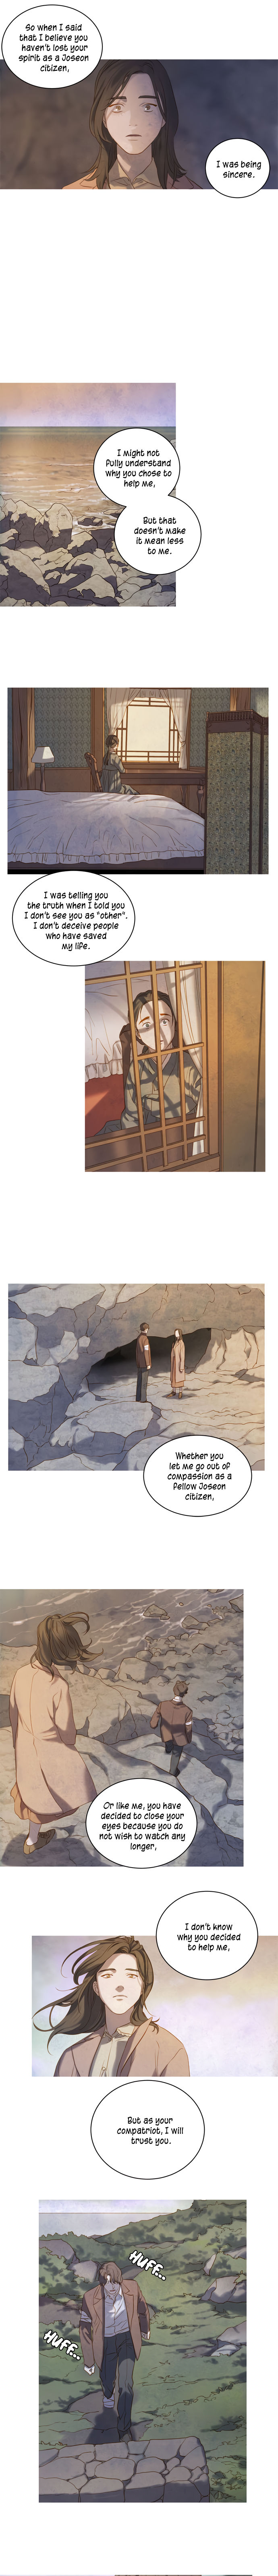 Gorae Byul - The Gyeongseong Mermaid - Chapter 5 Page 9